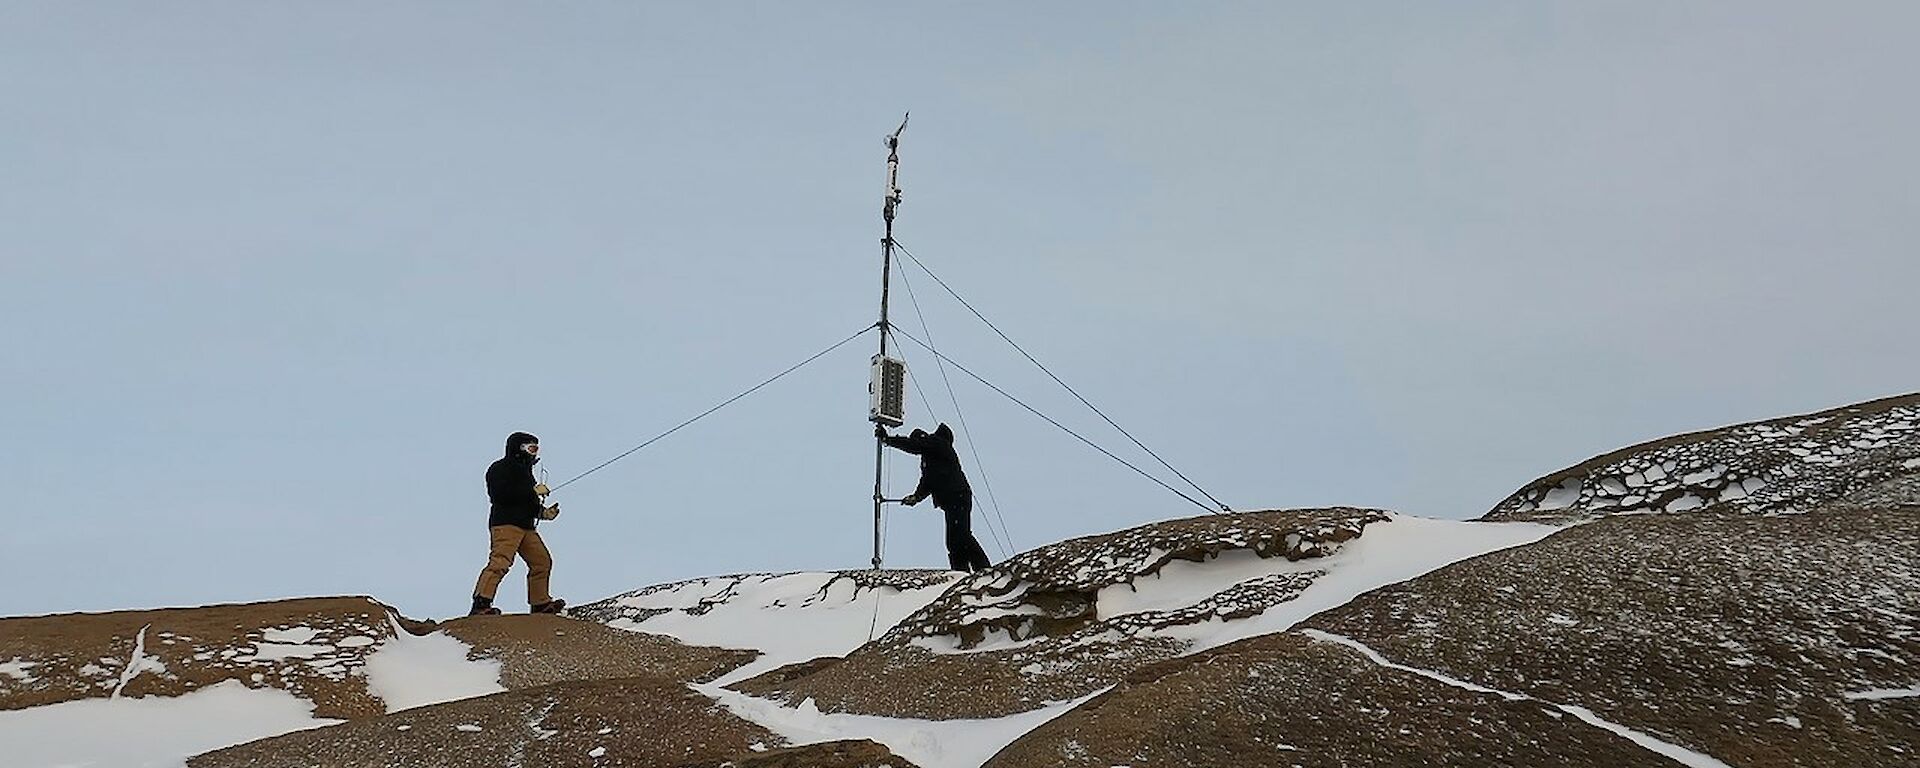 Two men stand on top of a rocky snow covered hill facing a mast. The mast holds a wind vane on top of it.